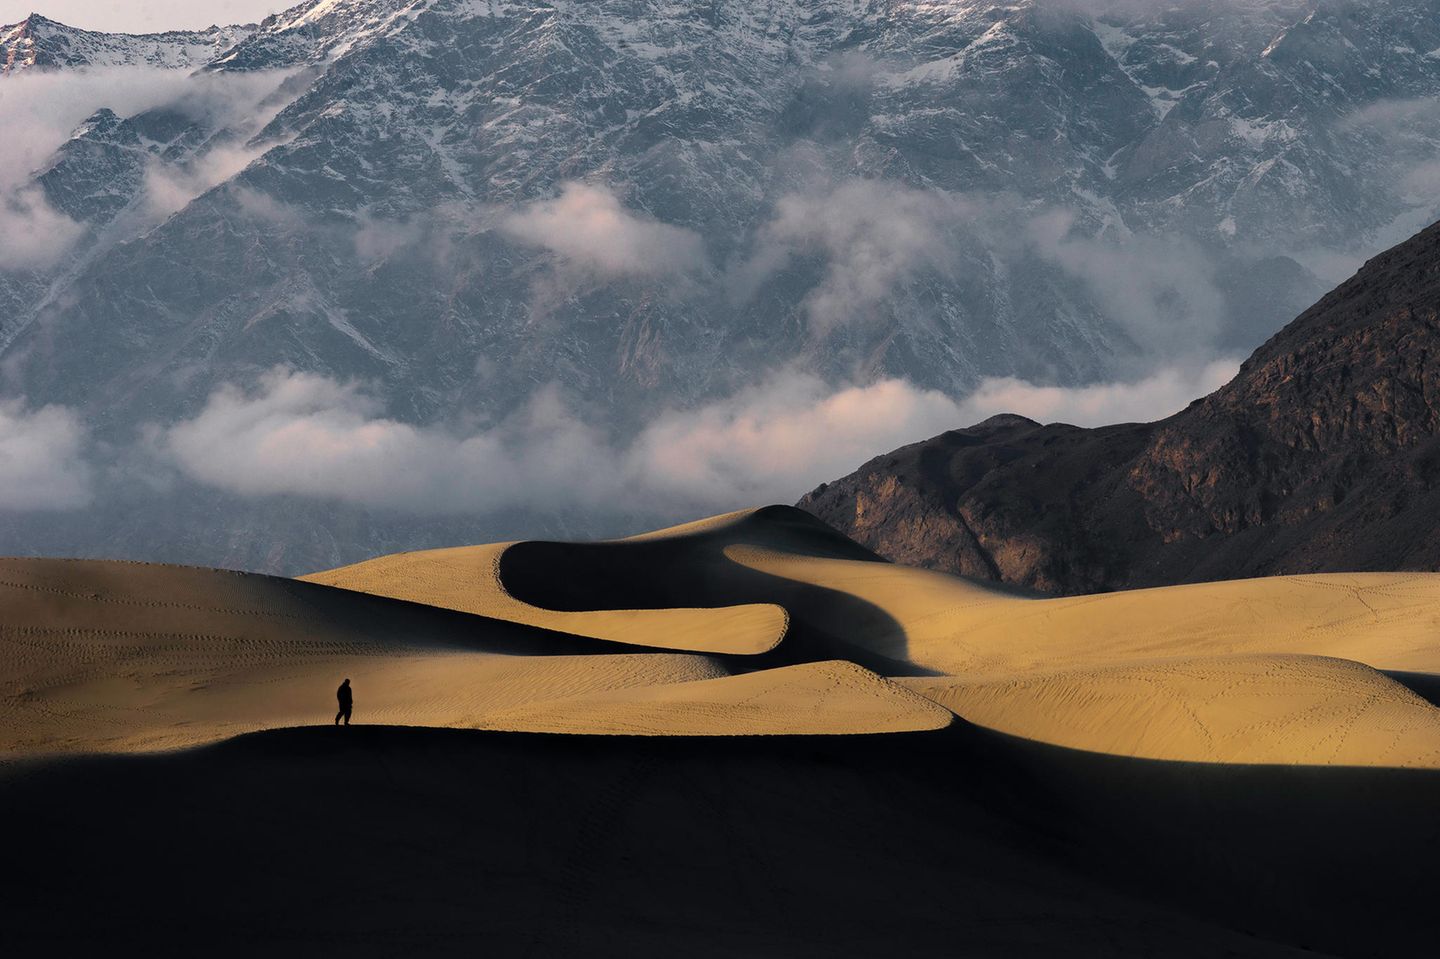 Image Name: Golden Snake  Photographer Name: Yawar Abbas  Year: 2022  Image Description: <p>In the light from this spectacular sunset the cold desert at Skardu looks like a Golden Snake.</p>  Copyright: © Yawar Abbas, Pakistan, Winner, National Awards, Travel, 2022 Sony World Photography Awards